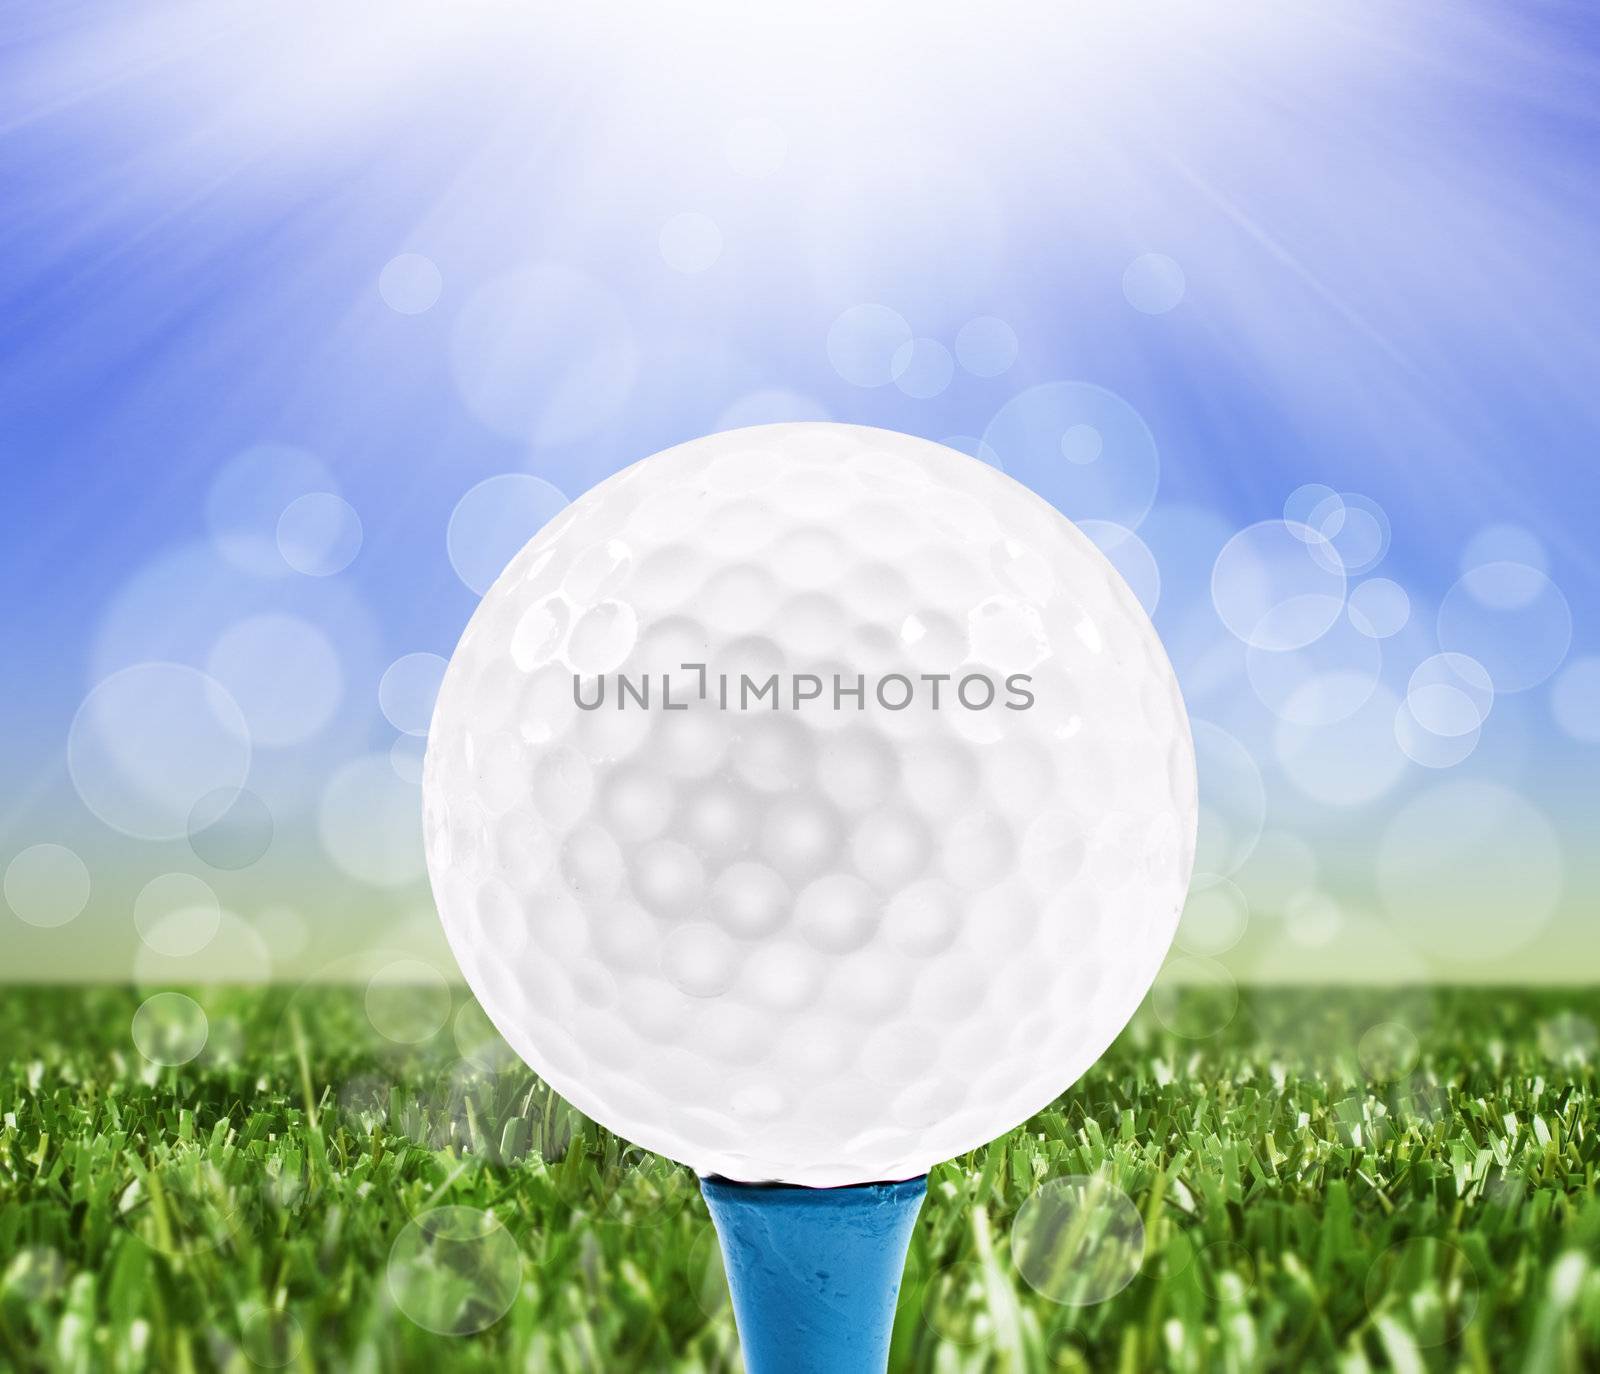 Spring background with a golf ball on a peg by tish1